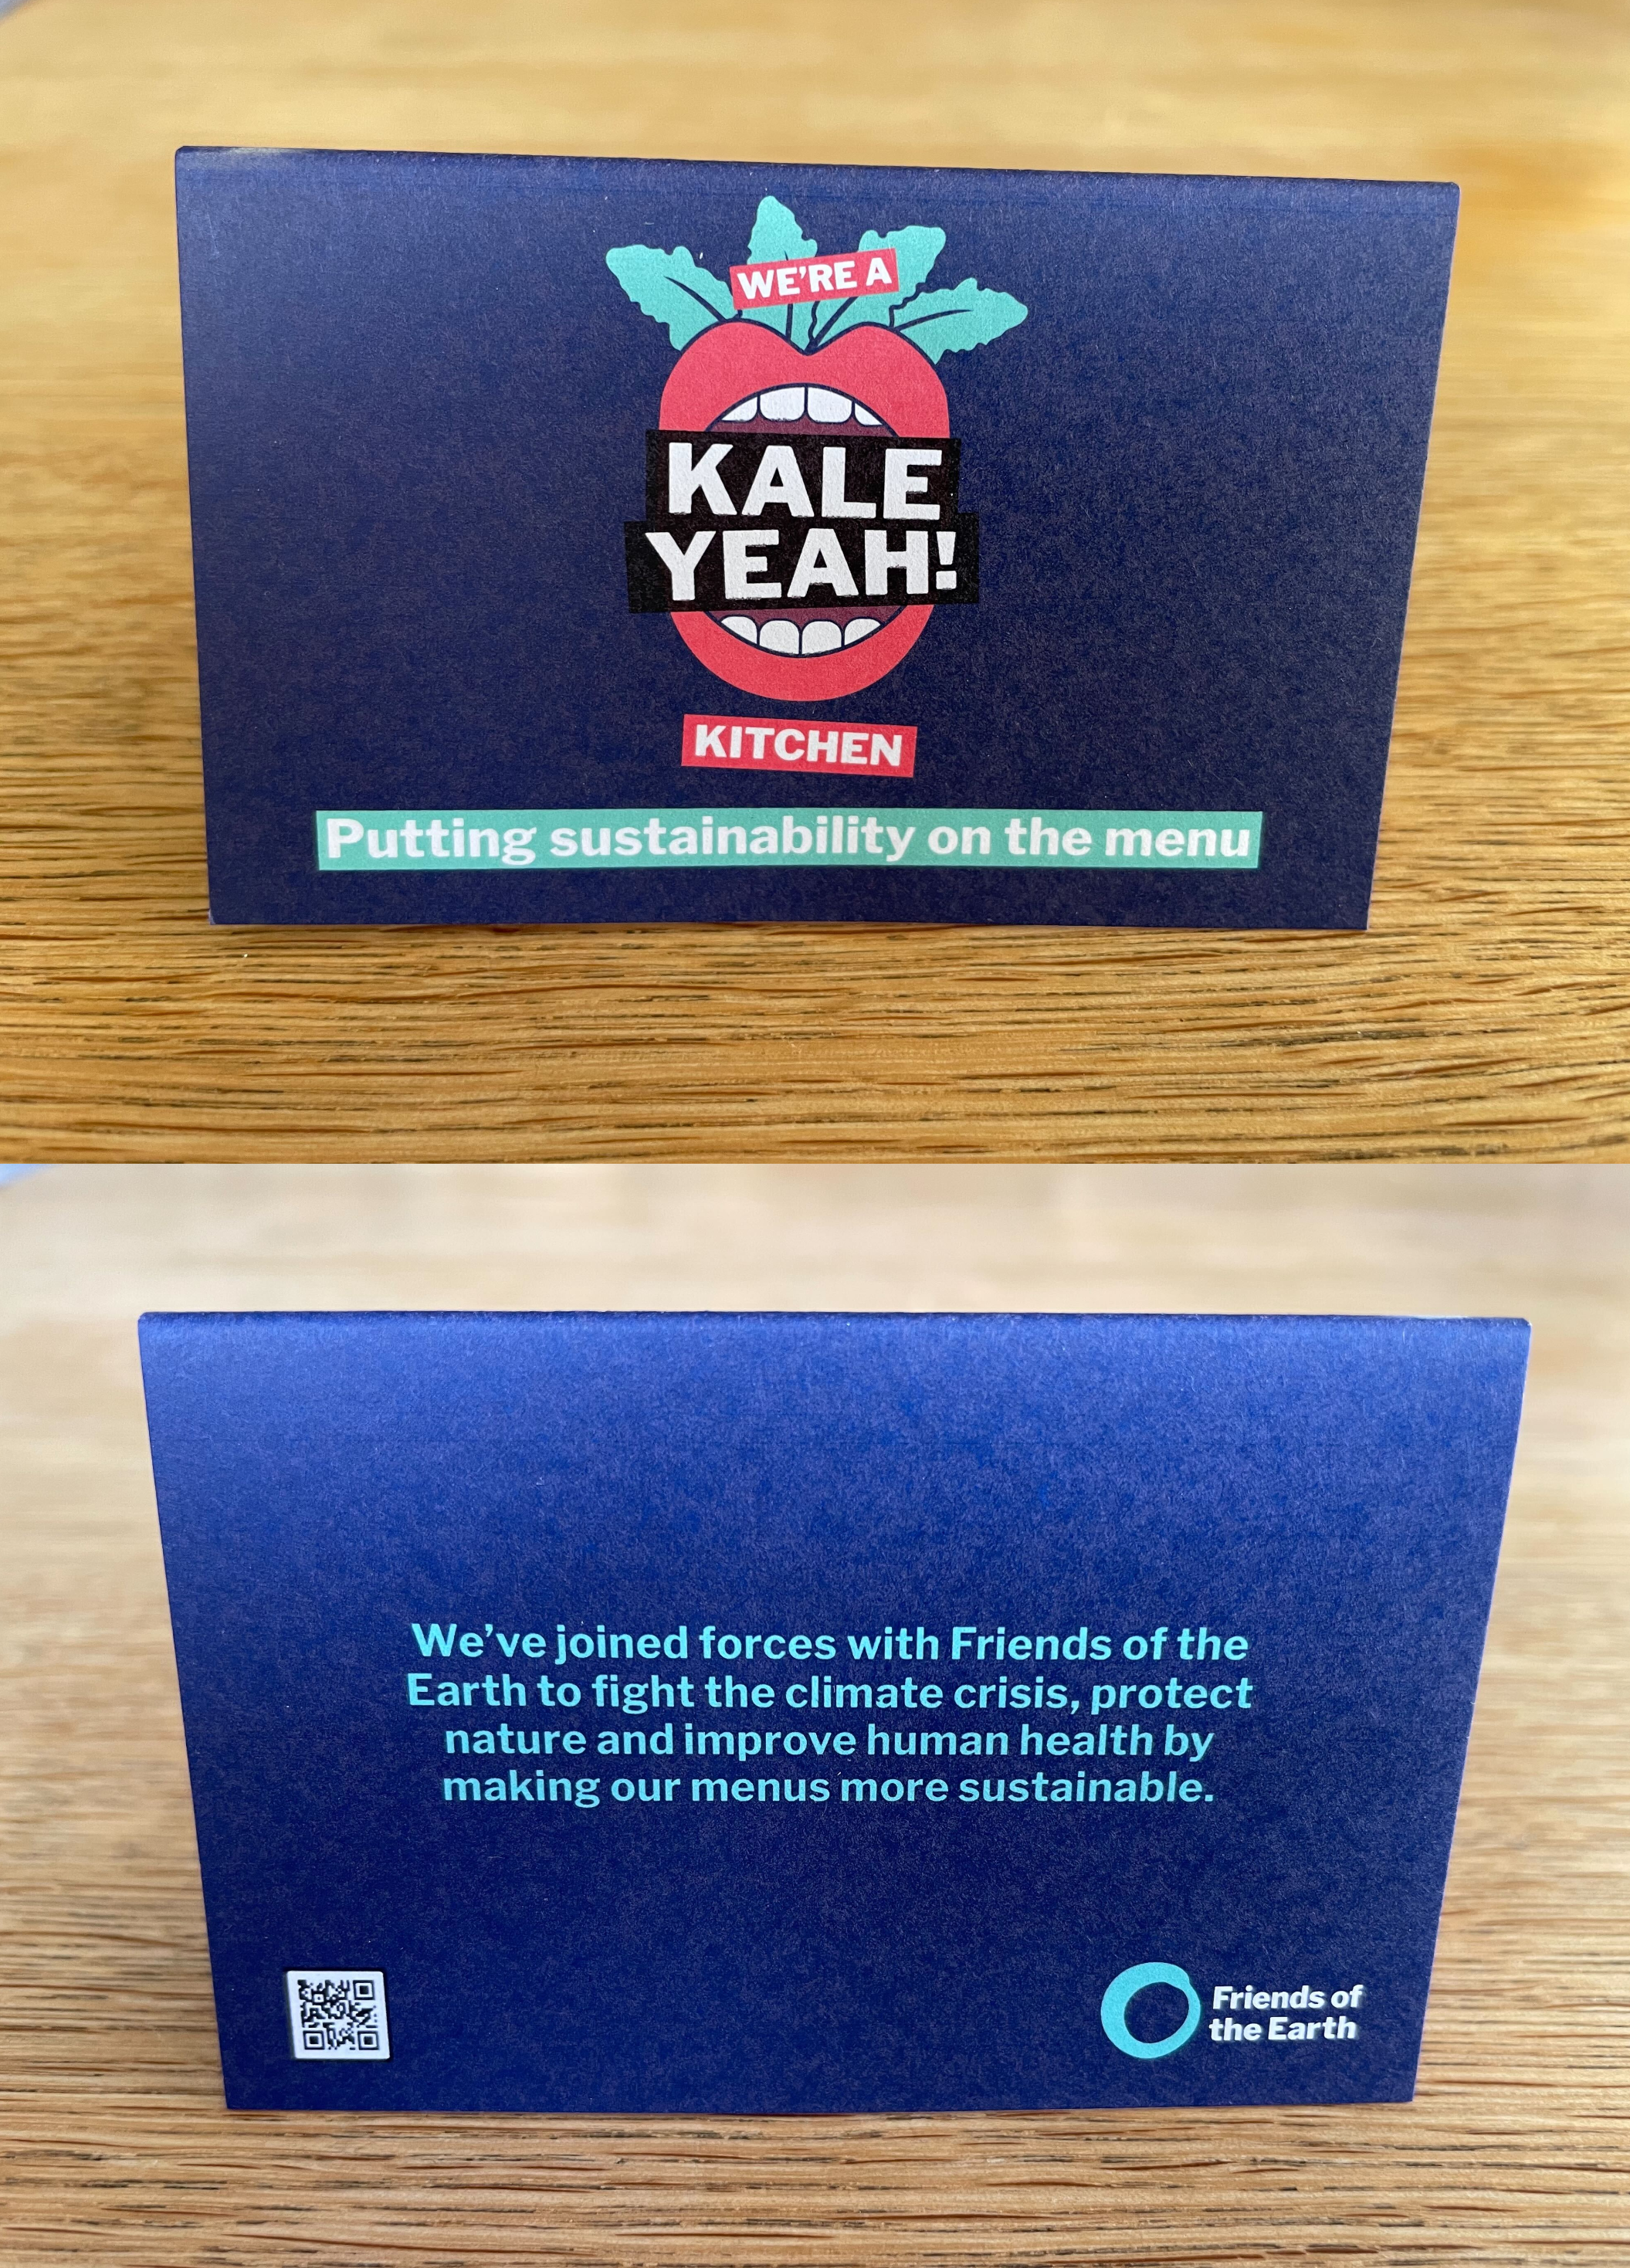 The front and back of the Kale Yeah! tent card, with information about the scheme